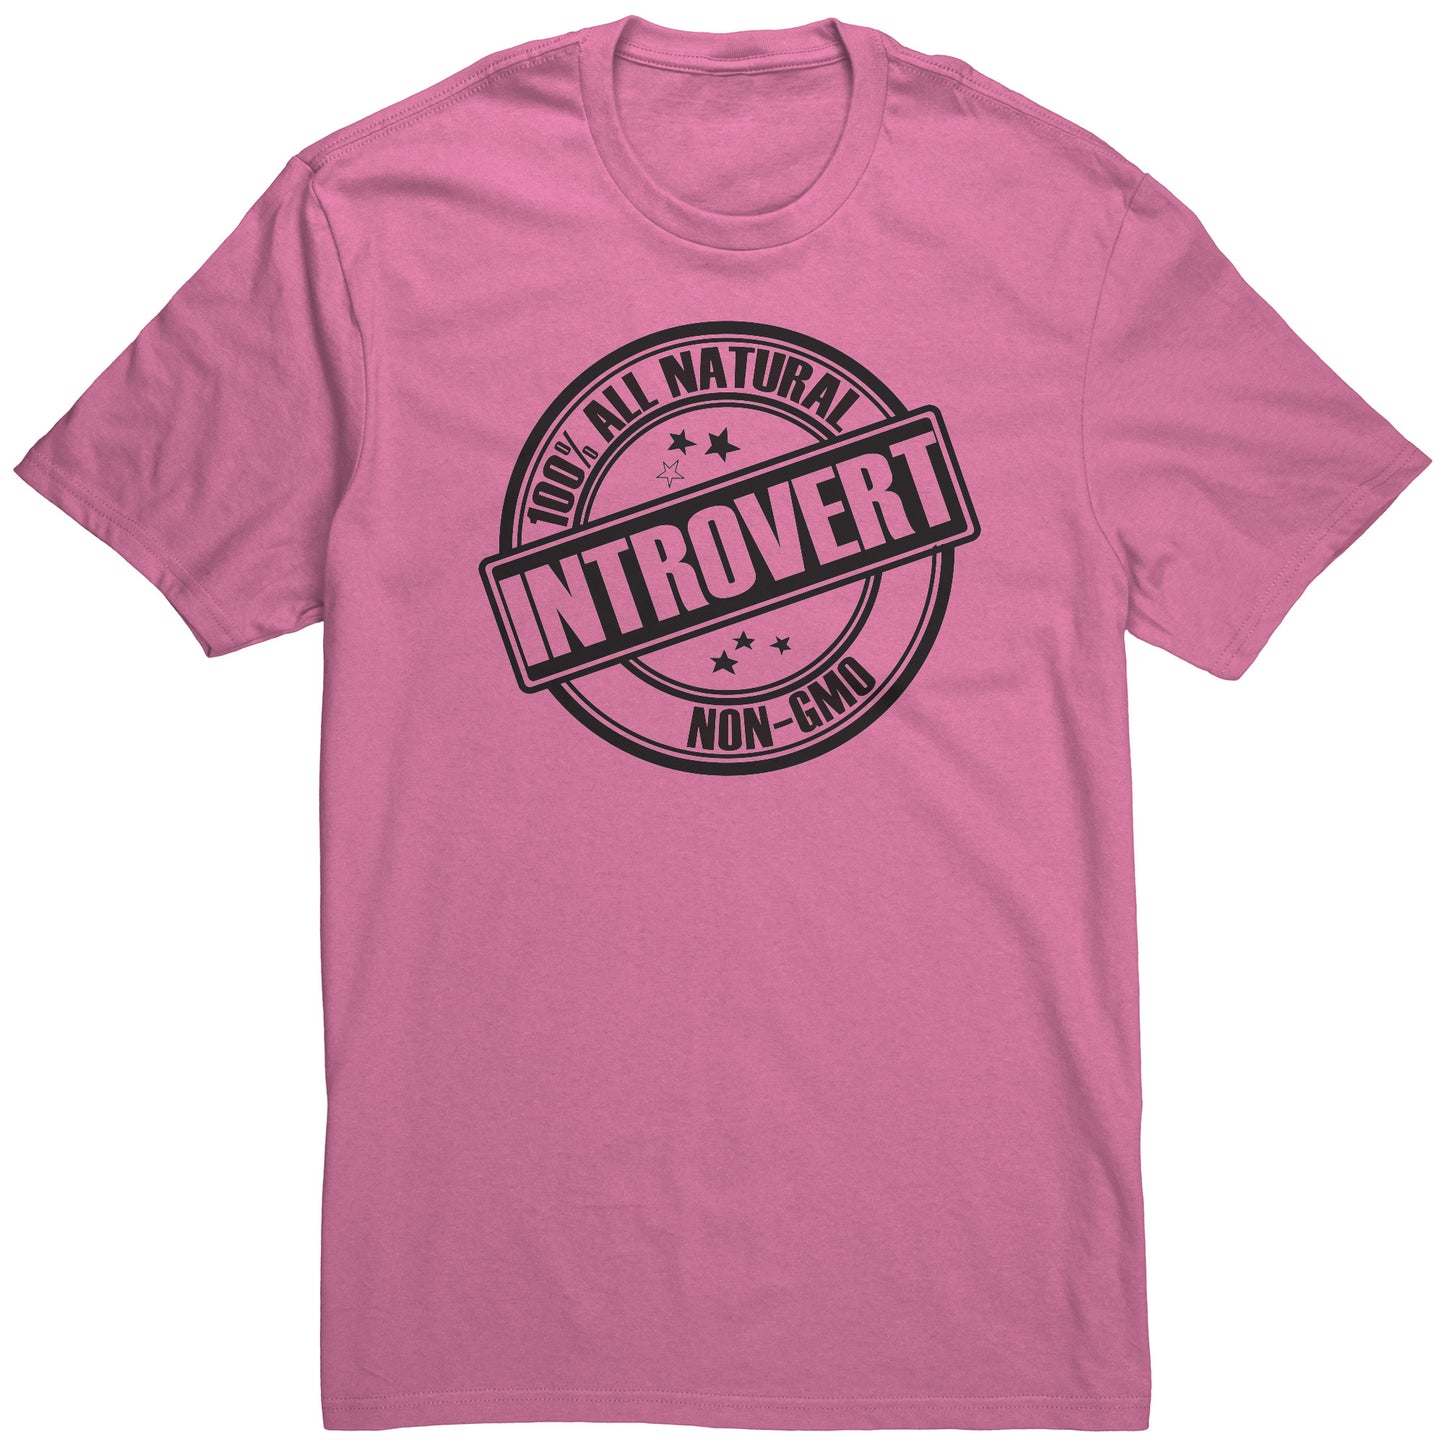 Adult Tee "100% All Natural Introvert" (black print)